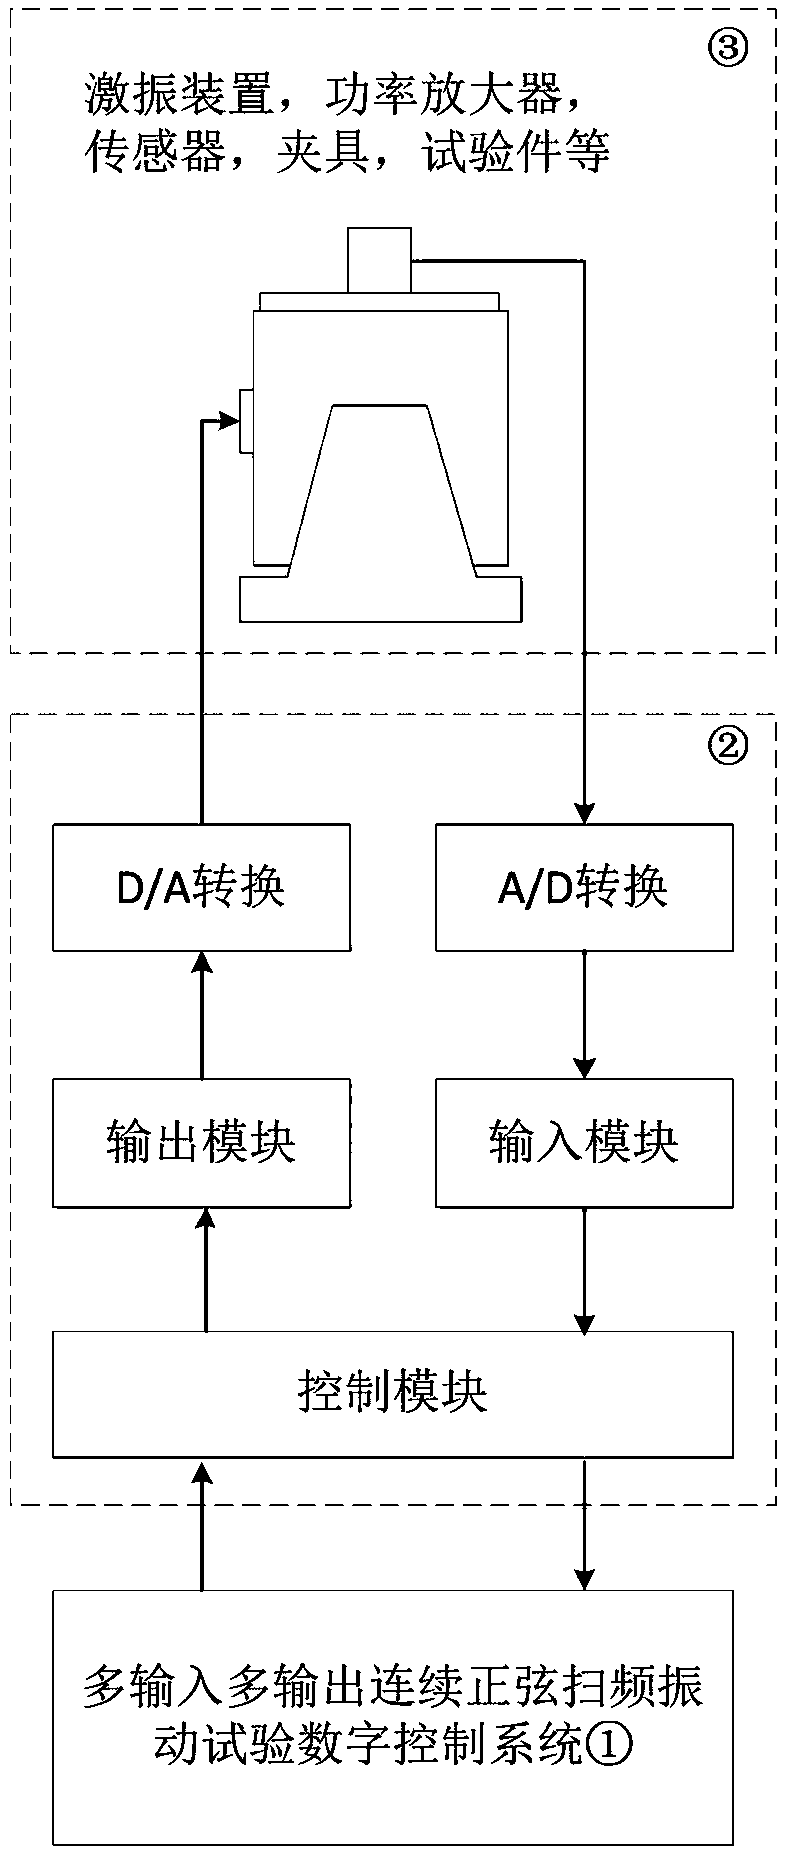 Multi-input multi-output continuous sine frequency sweep vibration test method and test system